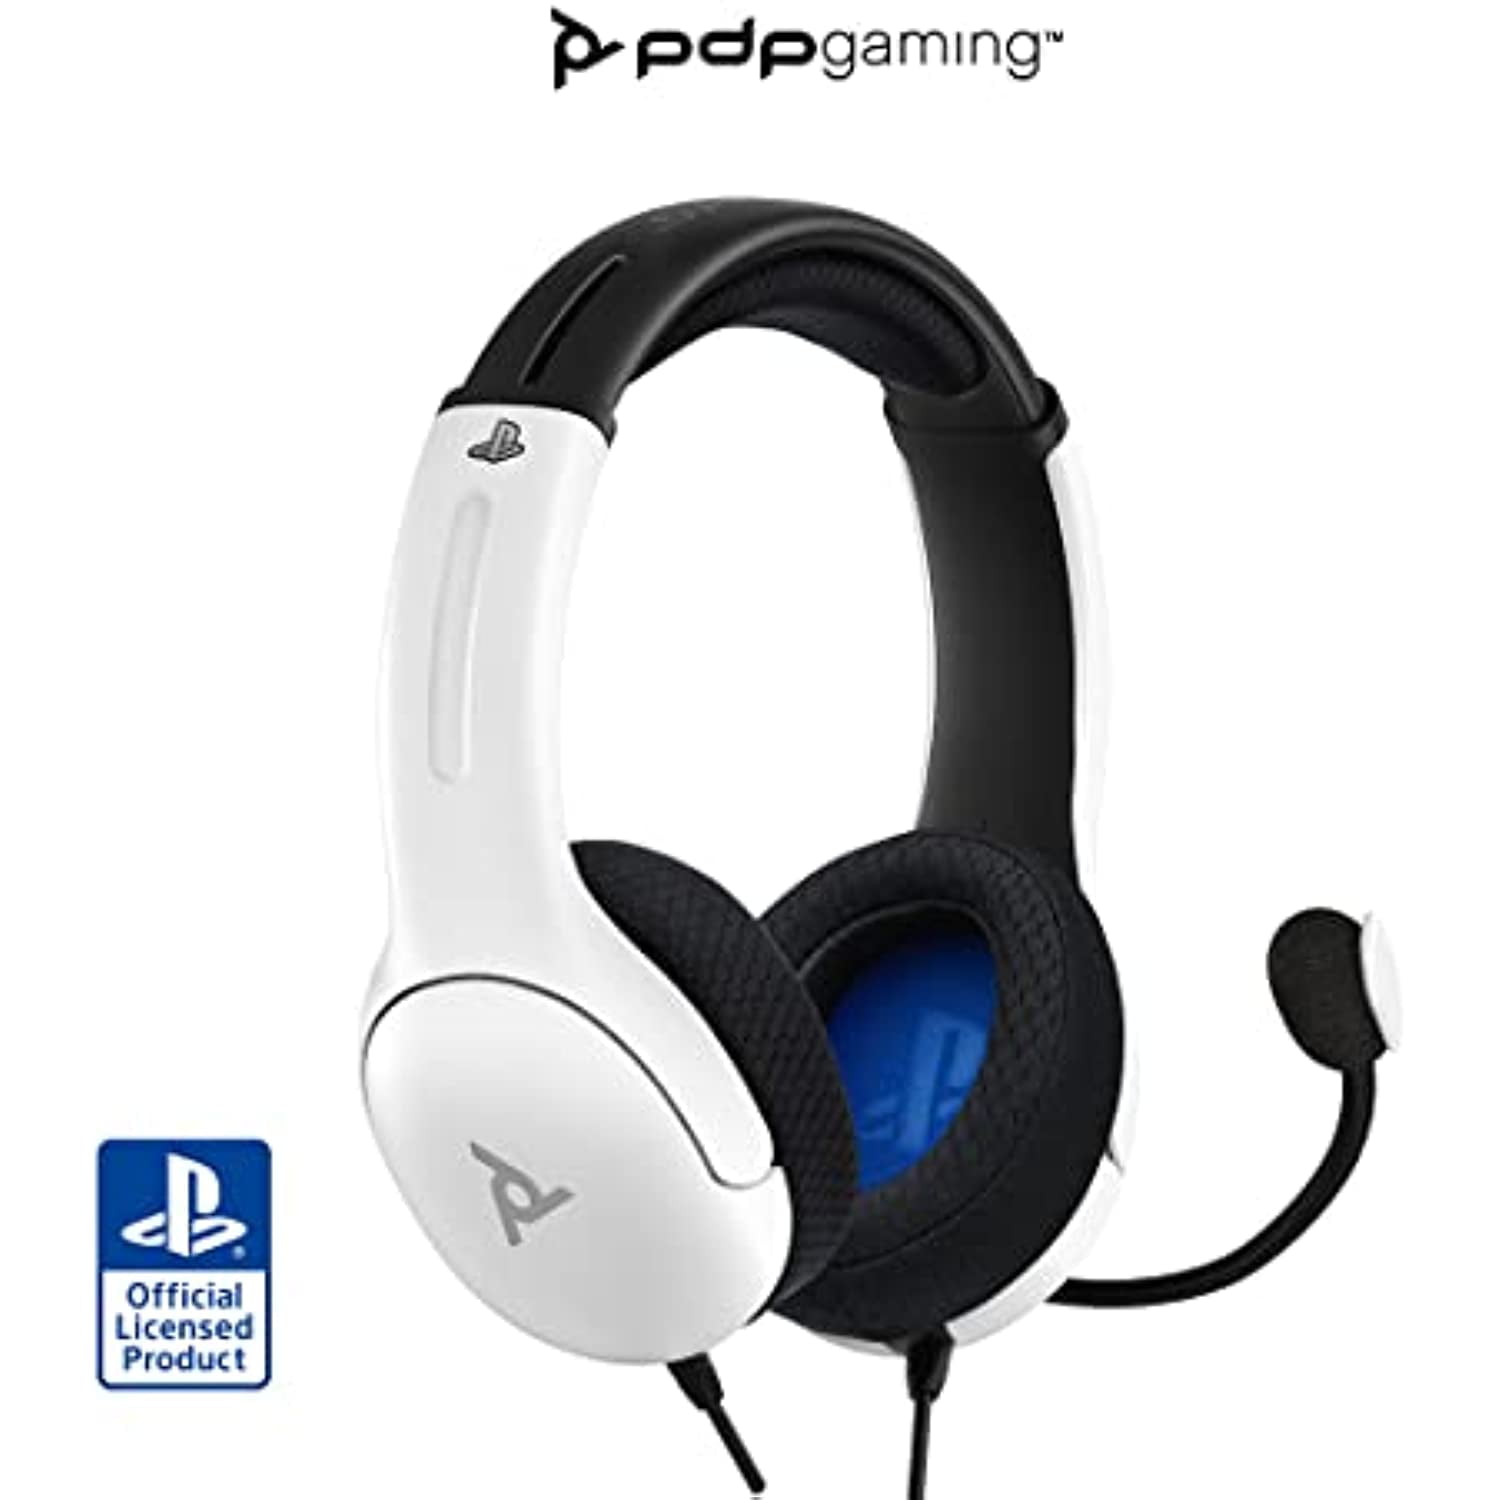 Level Up Your Game  LVL40 Wired Stereo Gaming Headset for